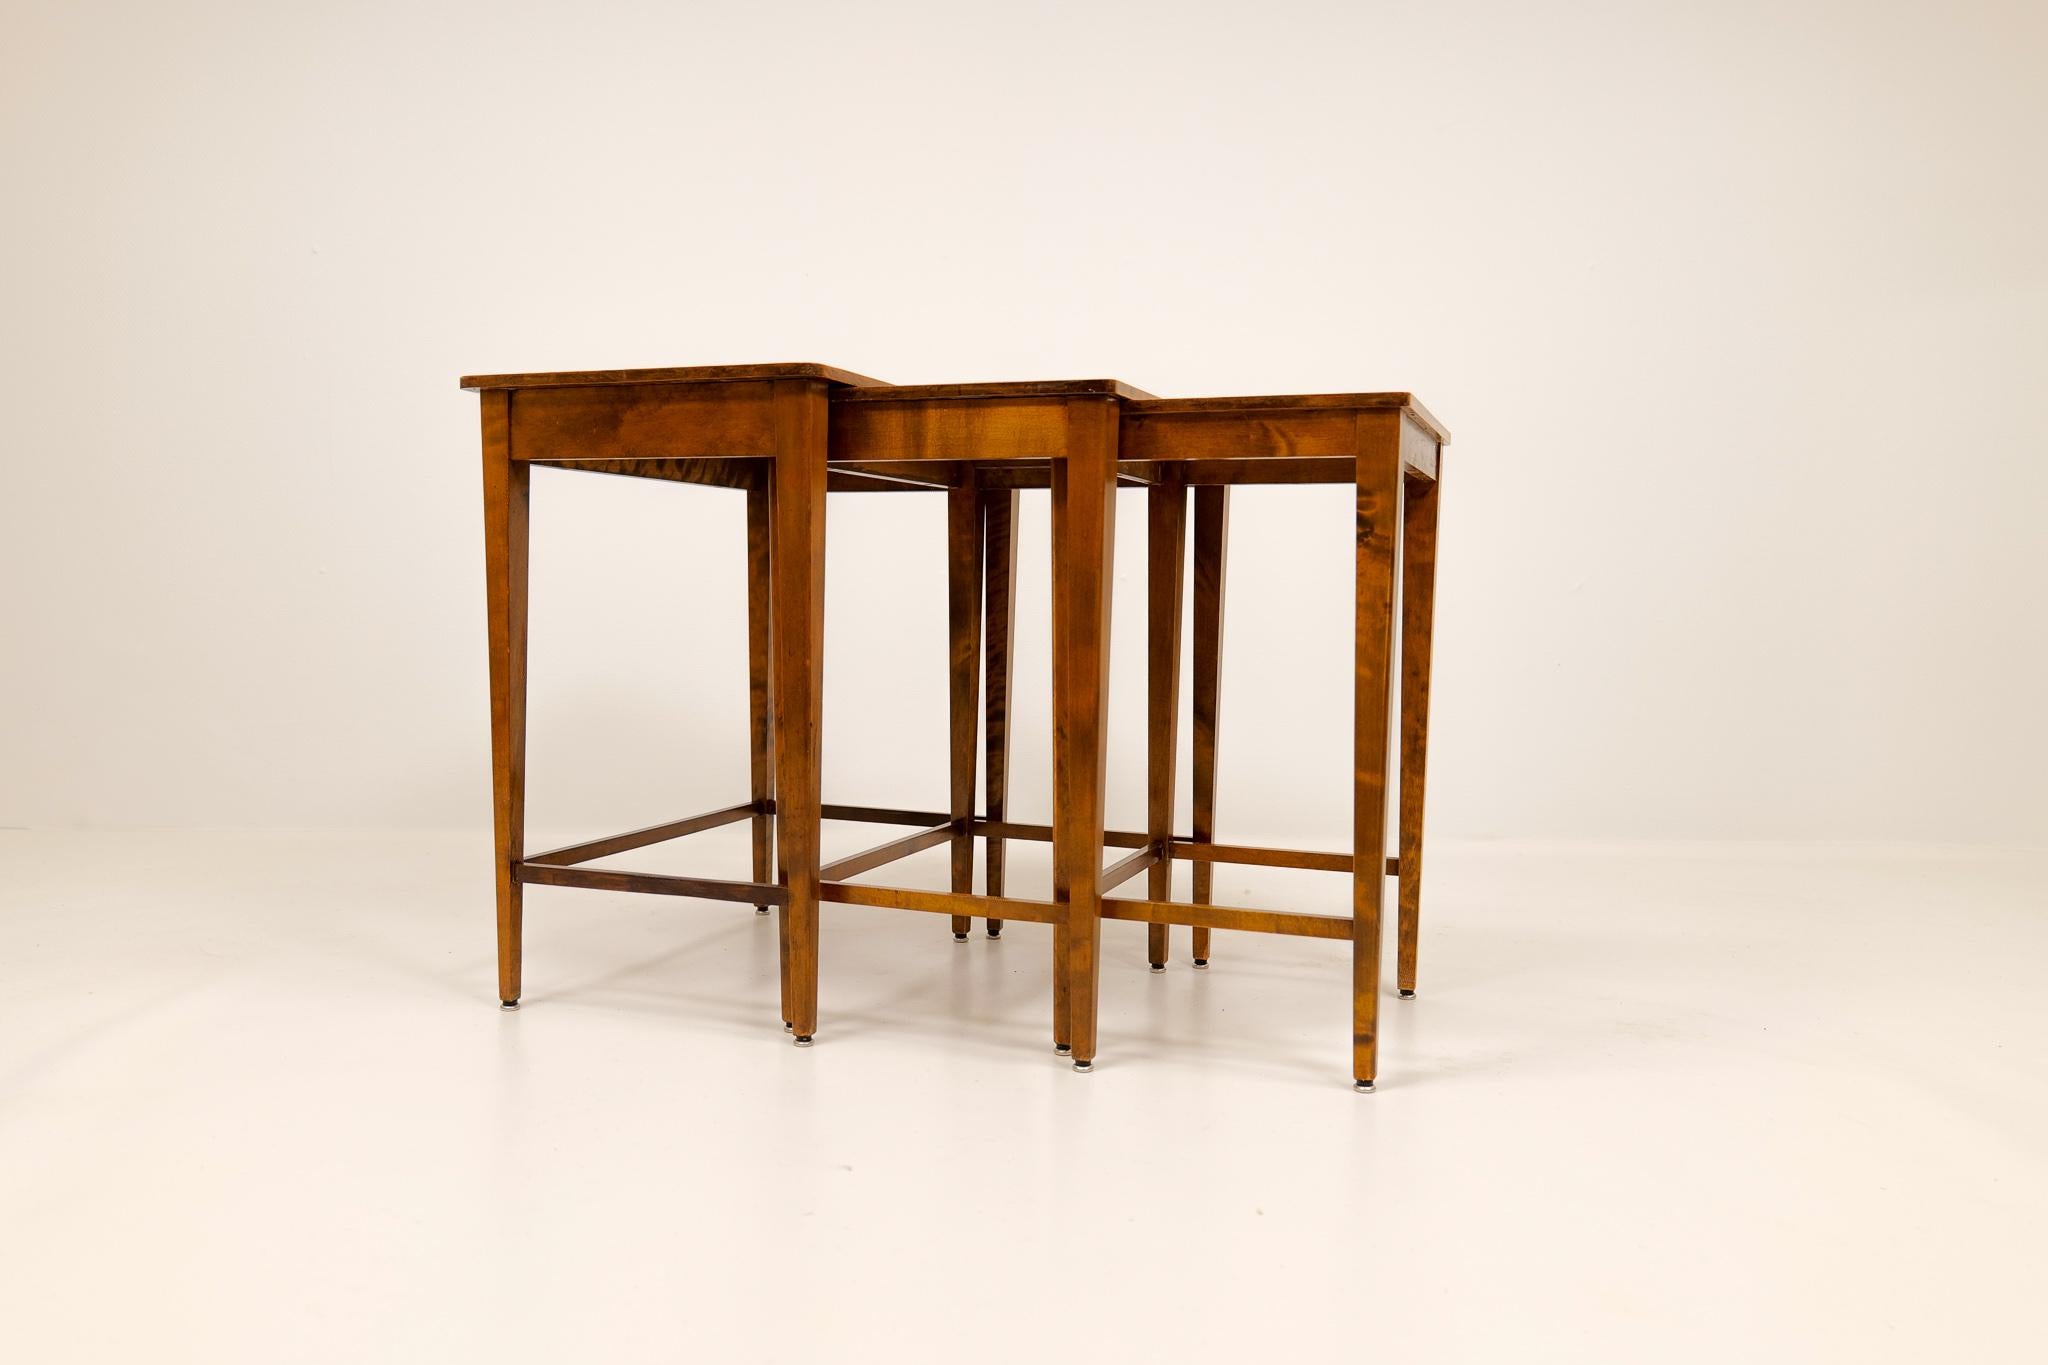 These nesting tables was produced in Sweden during the 1940s. They where produced at Nordiska Kompaniets (NK) factorys, and they only prodcued high uality pieces. The tables are beautiful done with mahognay veneer and nicely framed with Stained